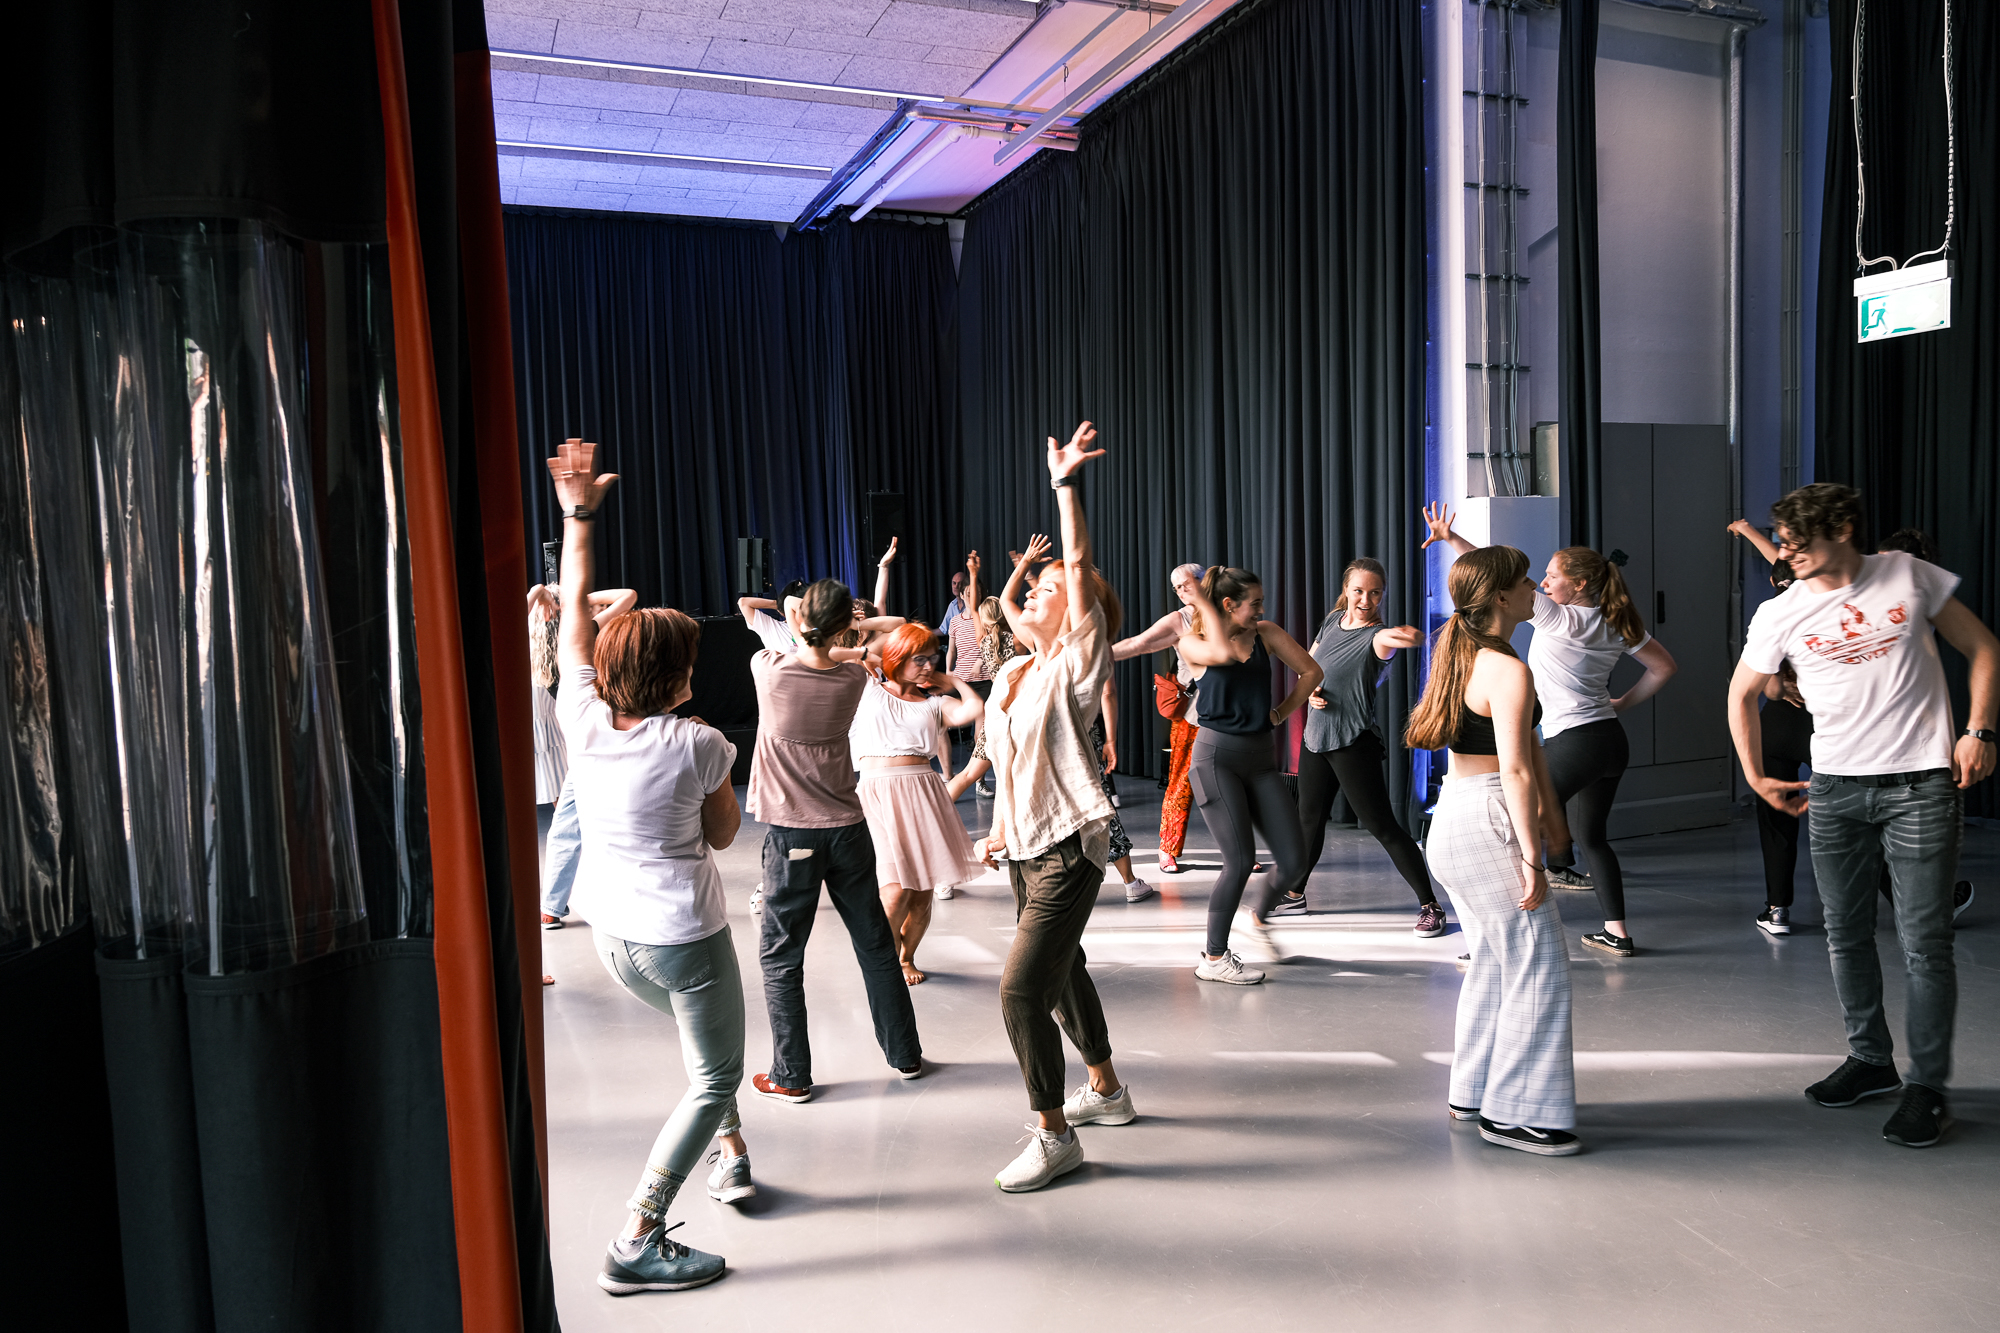 Large room with dark curtains from ceiling to floor, in the center of the picture people making dance movements